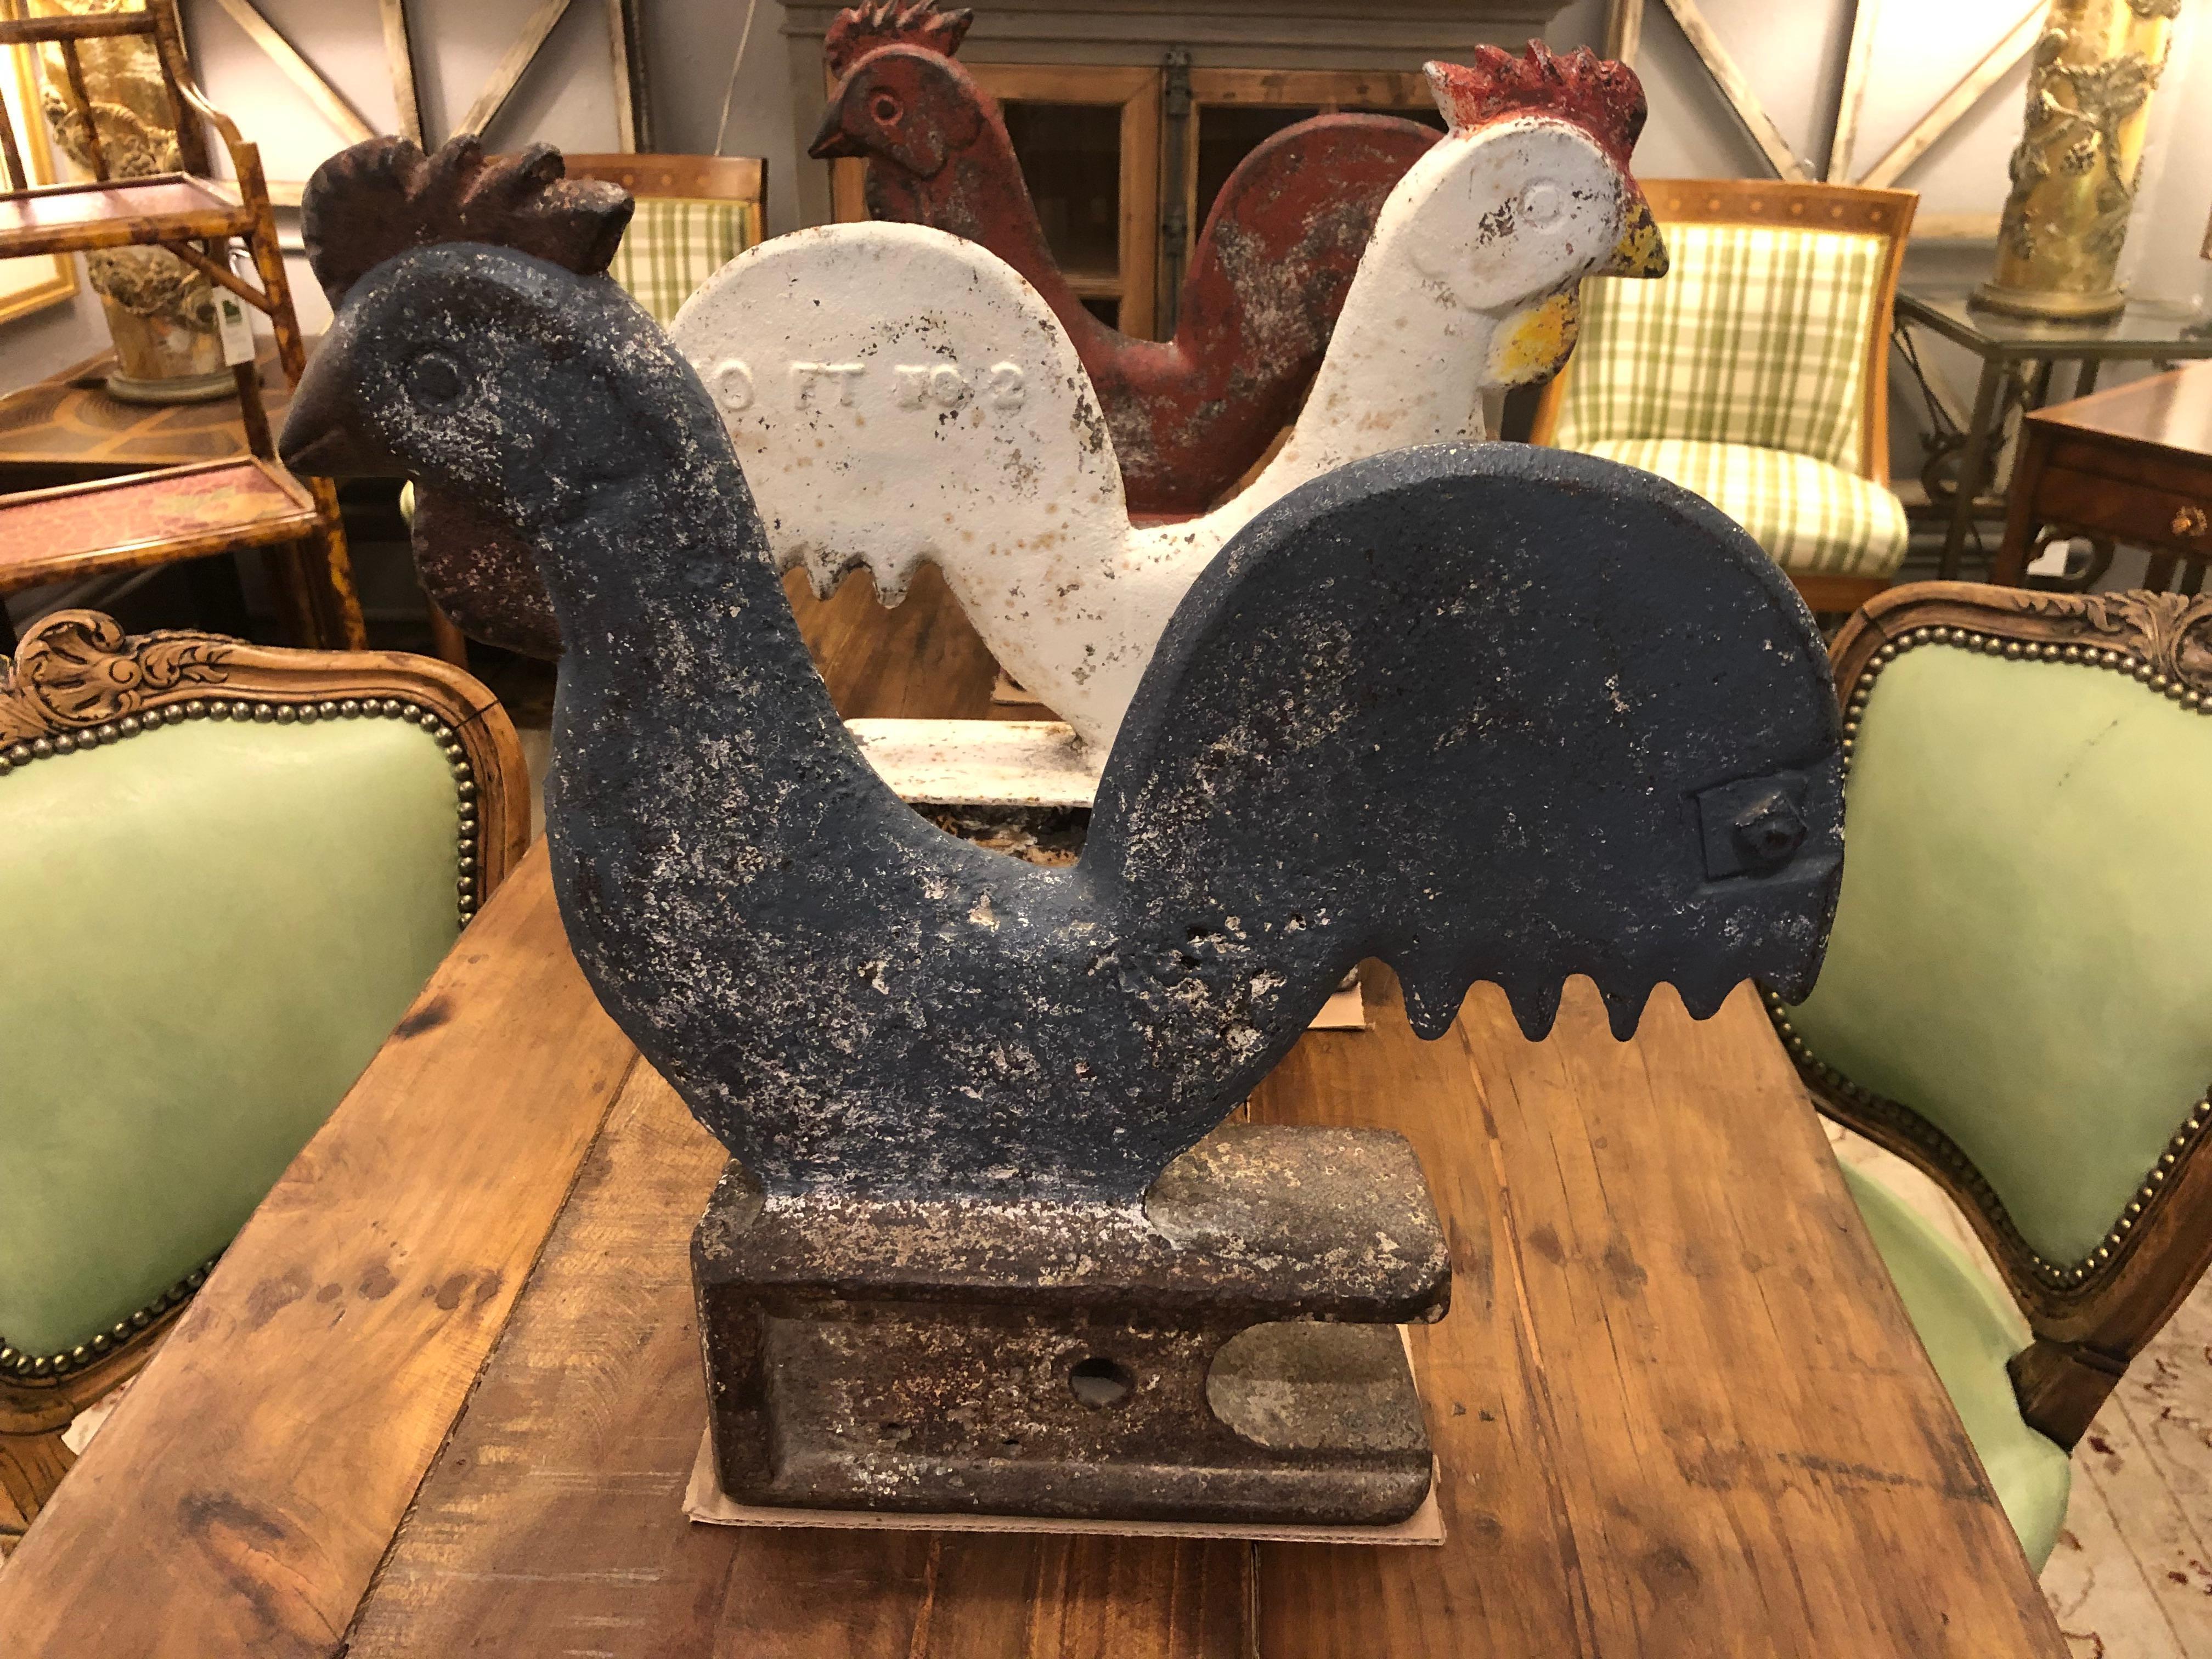 Very rare and fantastic found object trio of iron vintage cast iron windmill weights with Folk Art rooster charm. Original use was for a 10 foot wheel and used as a counter balance on the windmill as a weight. Original paint with a fabulous grouping